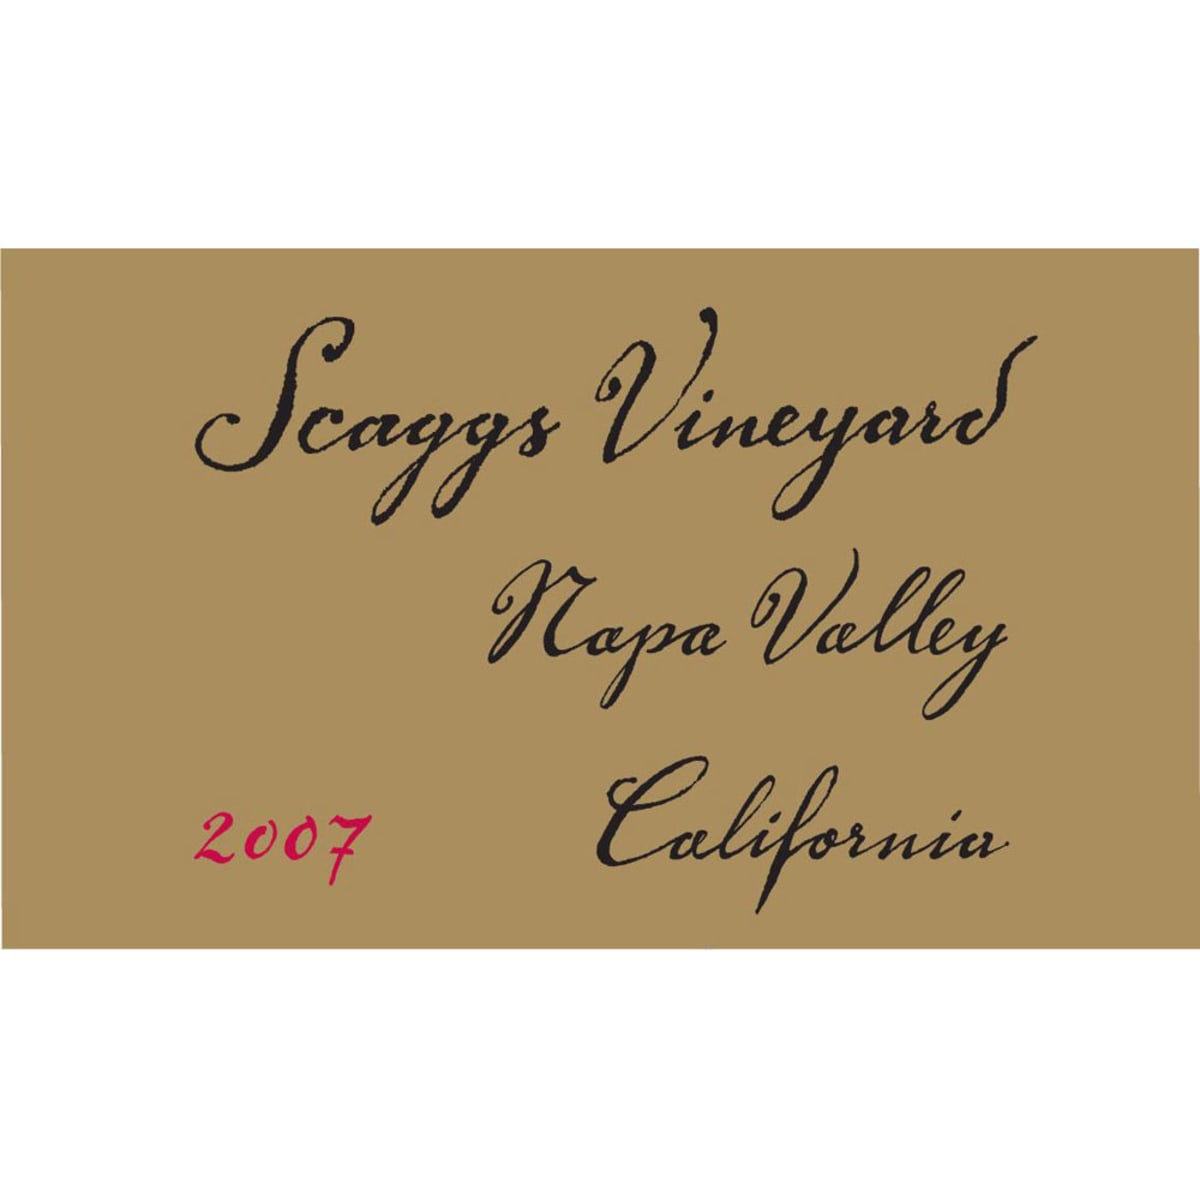 Scaggs Vineyard Montage 2007 Front Label